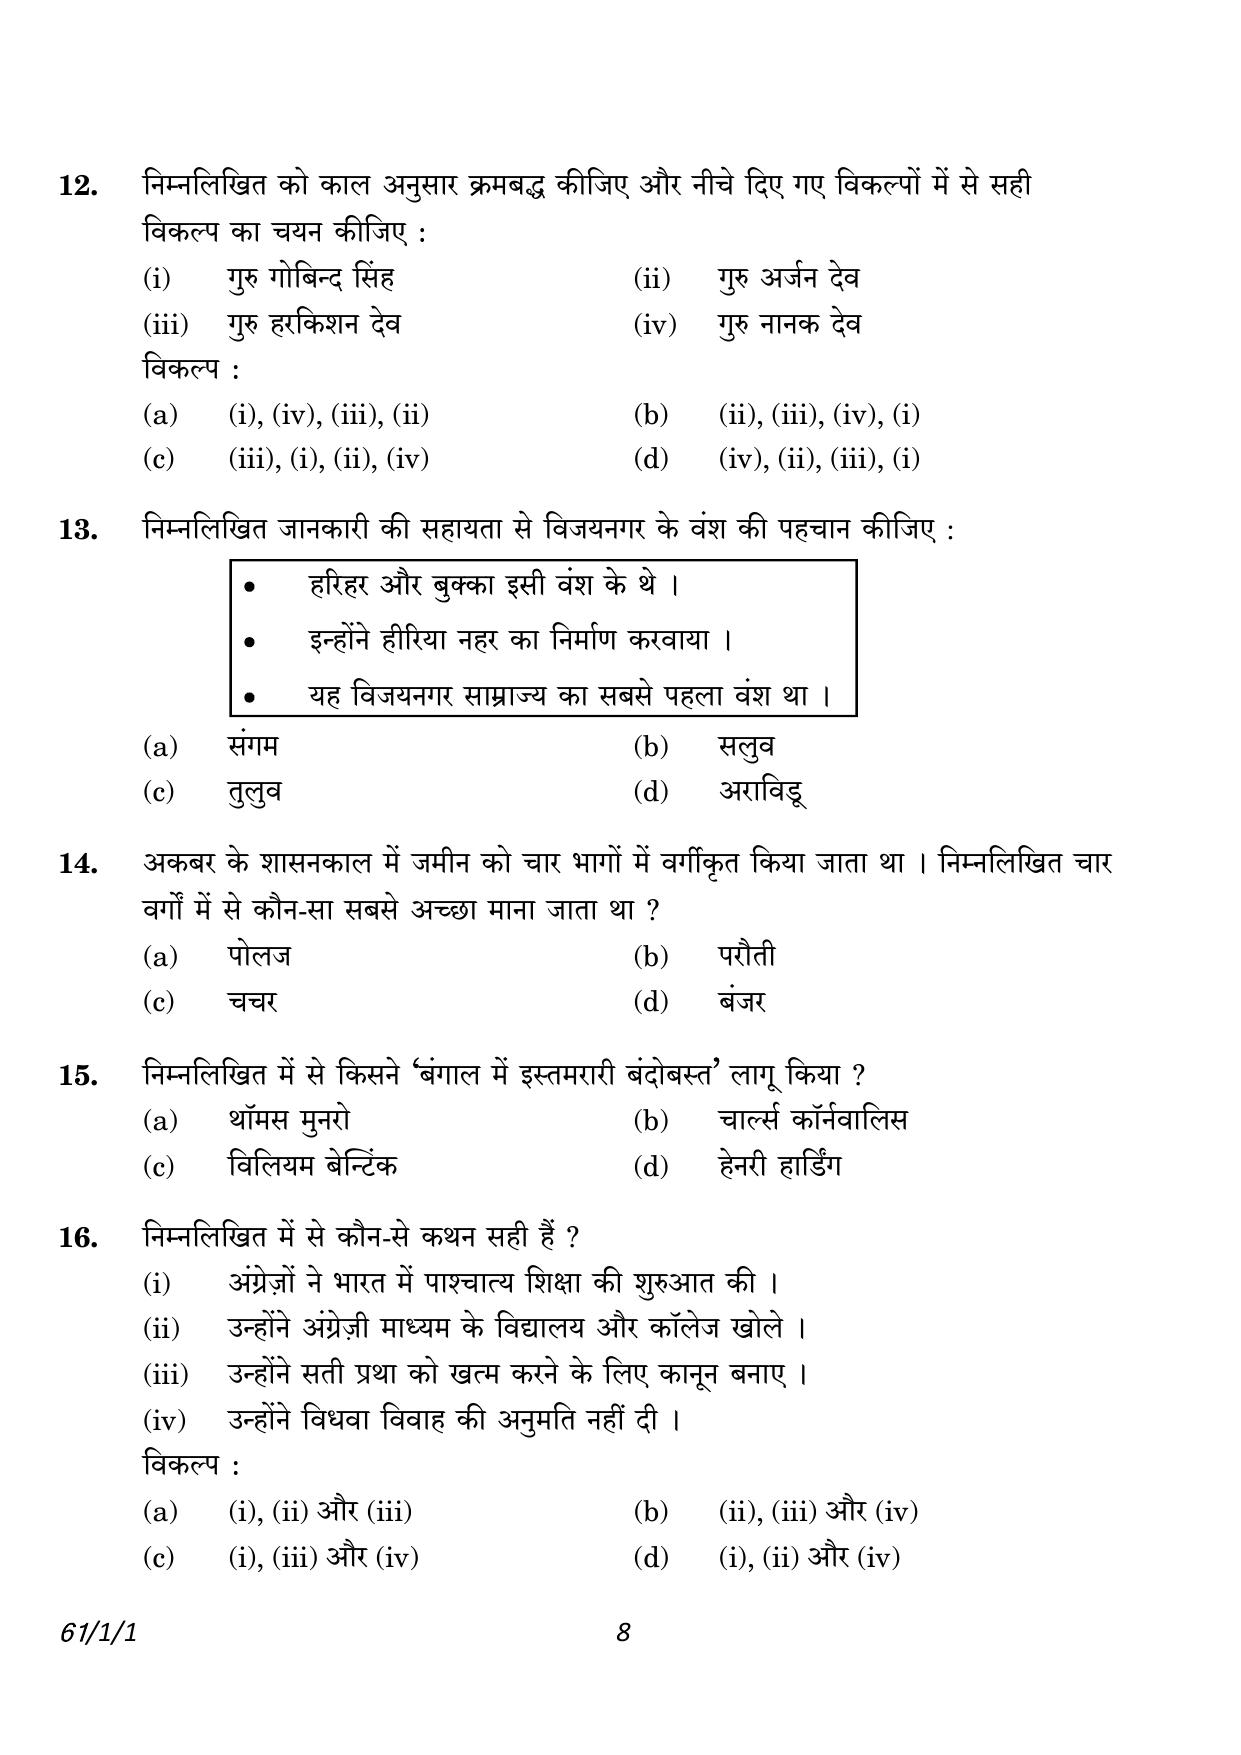 CBSE Class 12 61-1-1 History 2023 Question Paper - Page 8